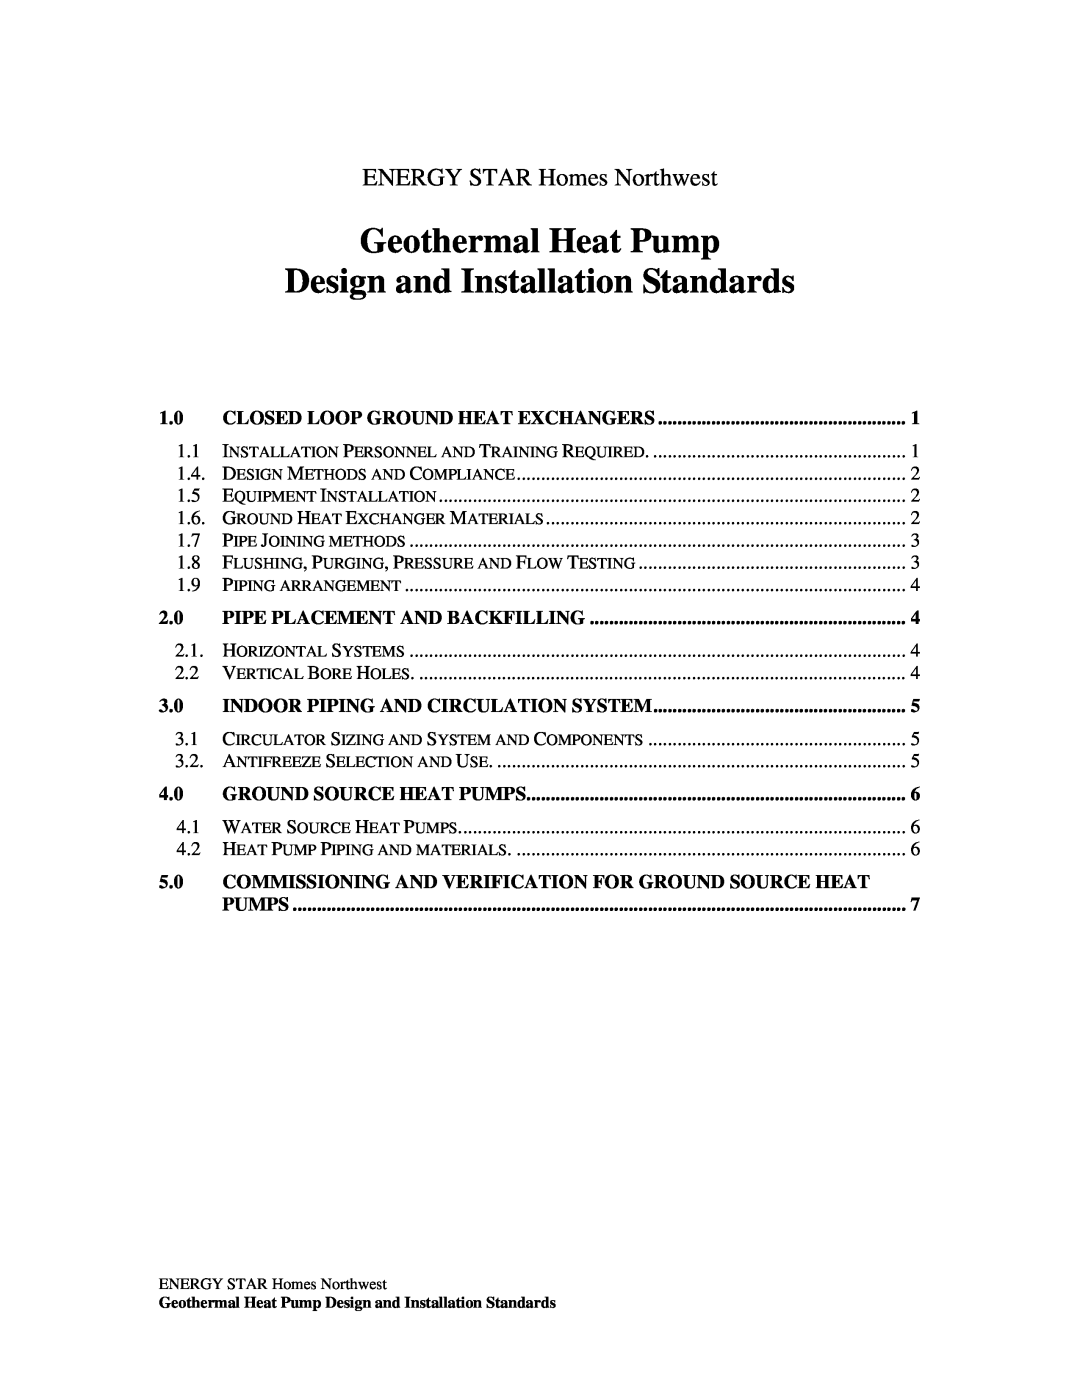 Energy Tech Laboratories Homes Northwest manual Geothermal Heat Pump, Design and Installation Standards 